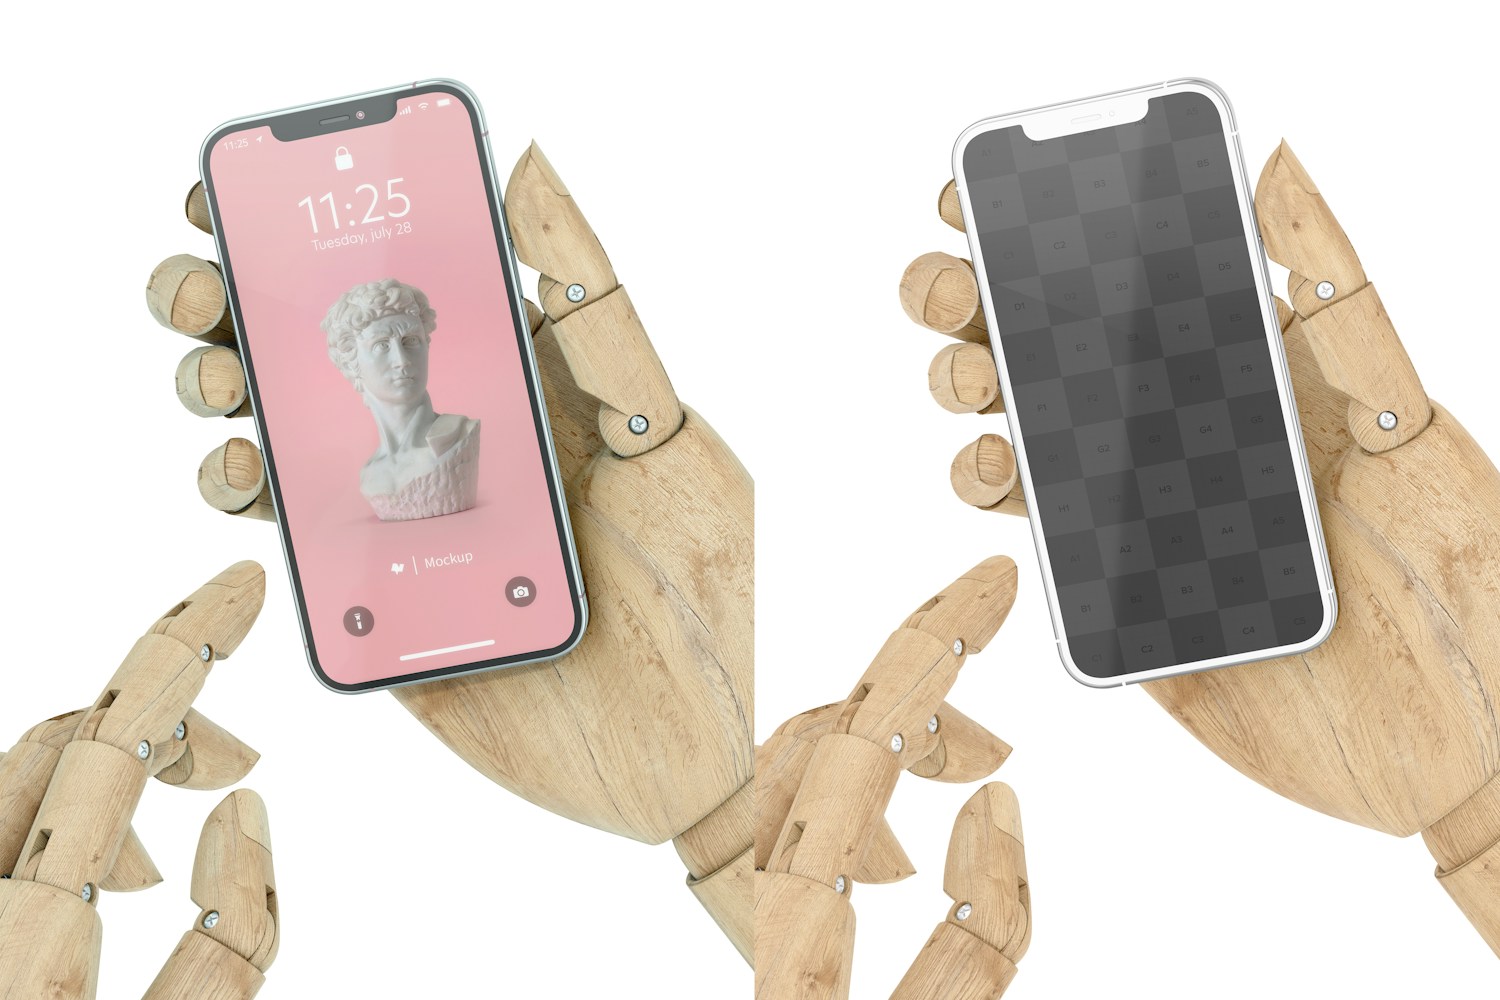 Smartphone with Hands Mockup